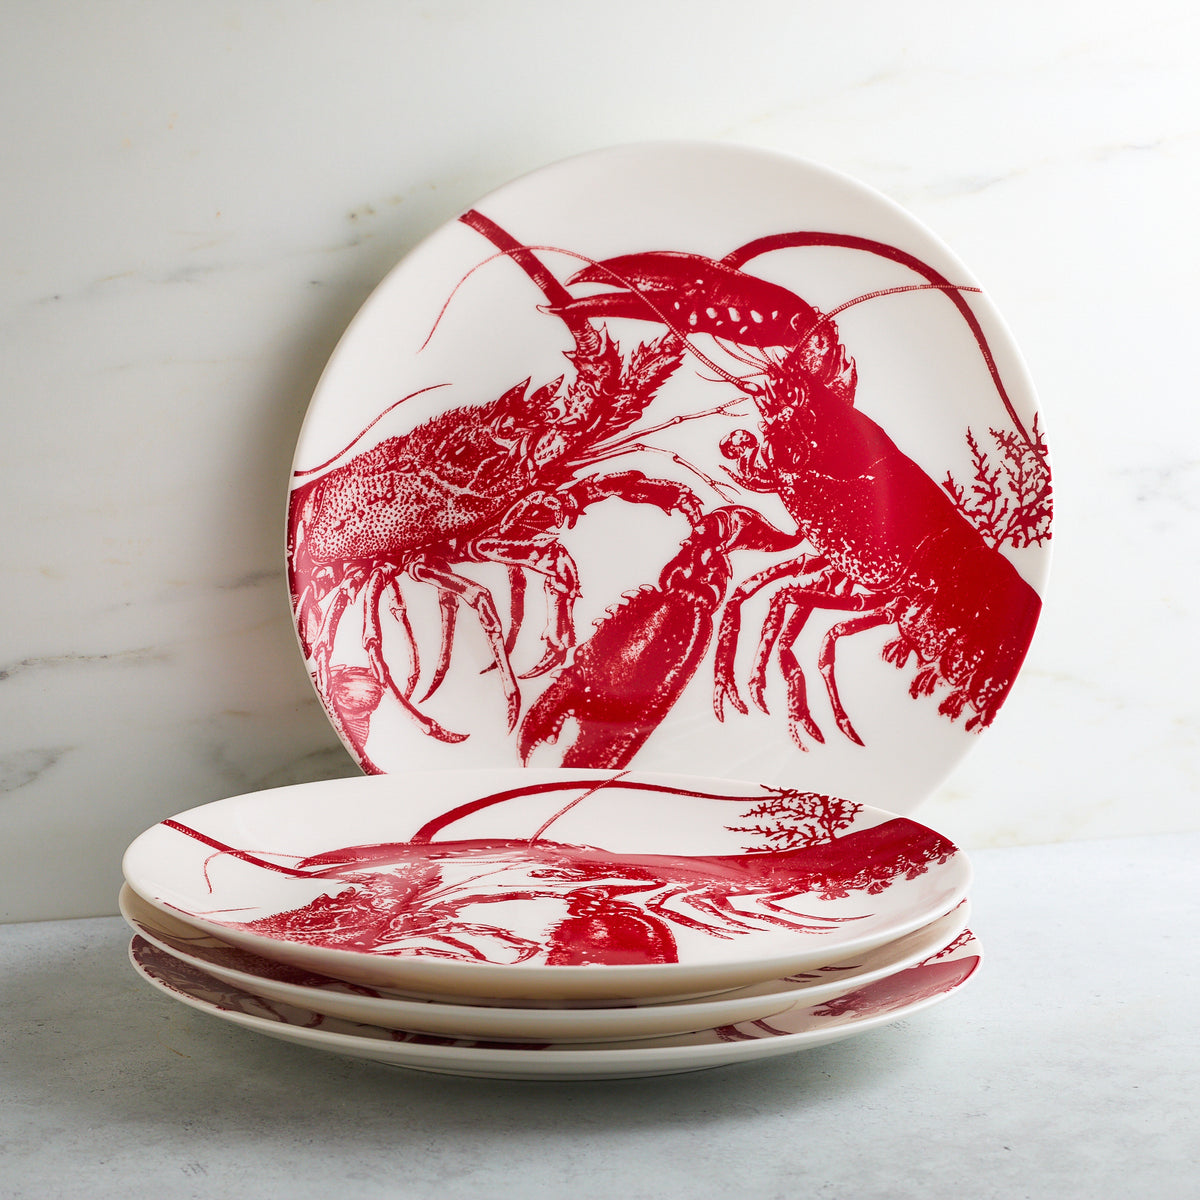 A set of premium porcelain plates with red lobster designs, stacked neatly on a white marble surface. Dishwasher and microwave safe, these seaside style Lobster Coupe Dinner Plates by Caskata add a touch of coastal charm to your dining experience.